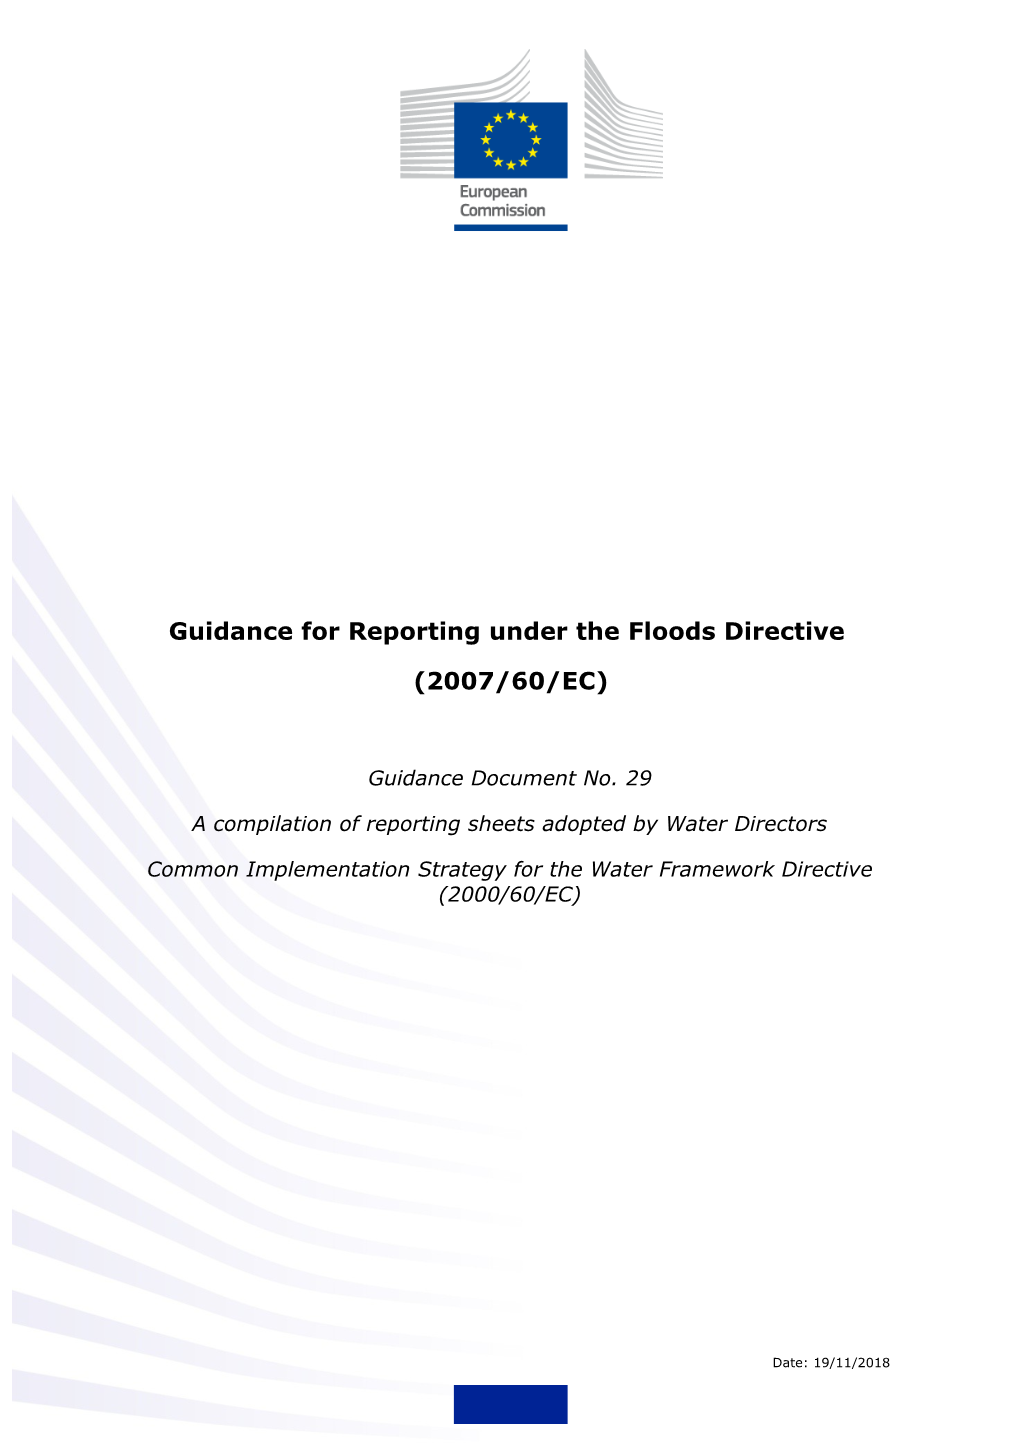 Guidance for Reporting Under the Floods Directive